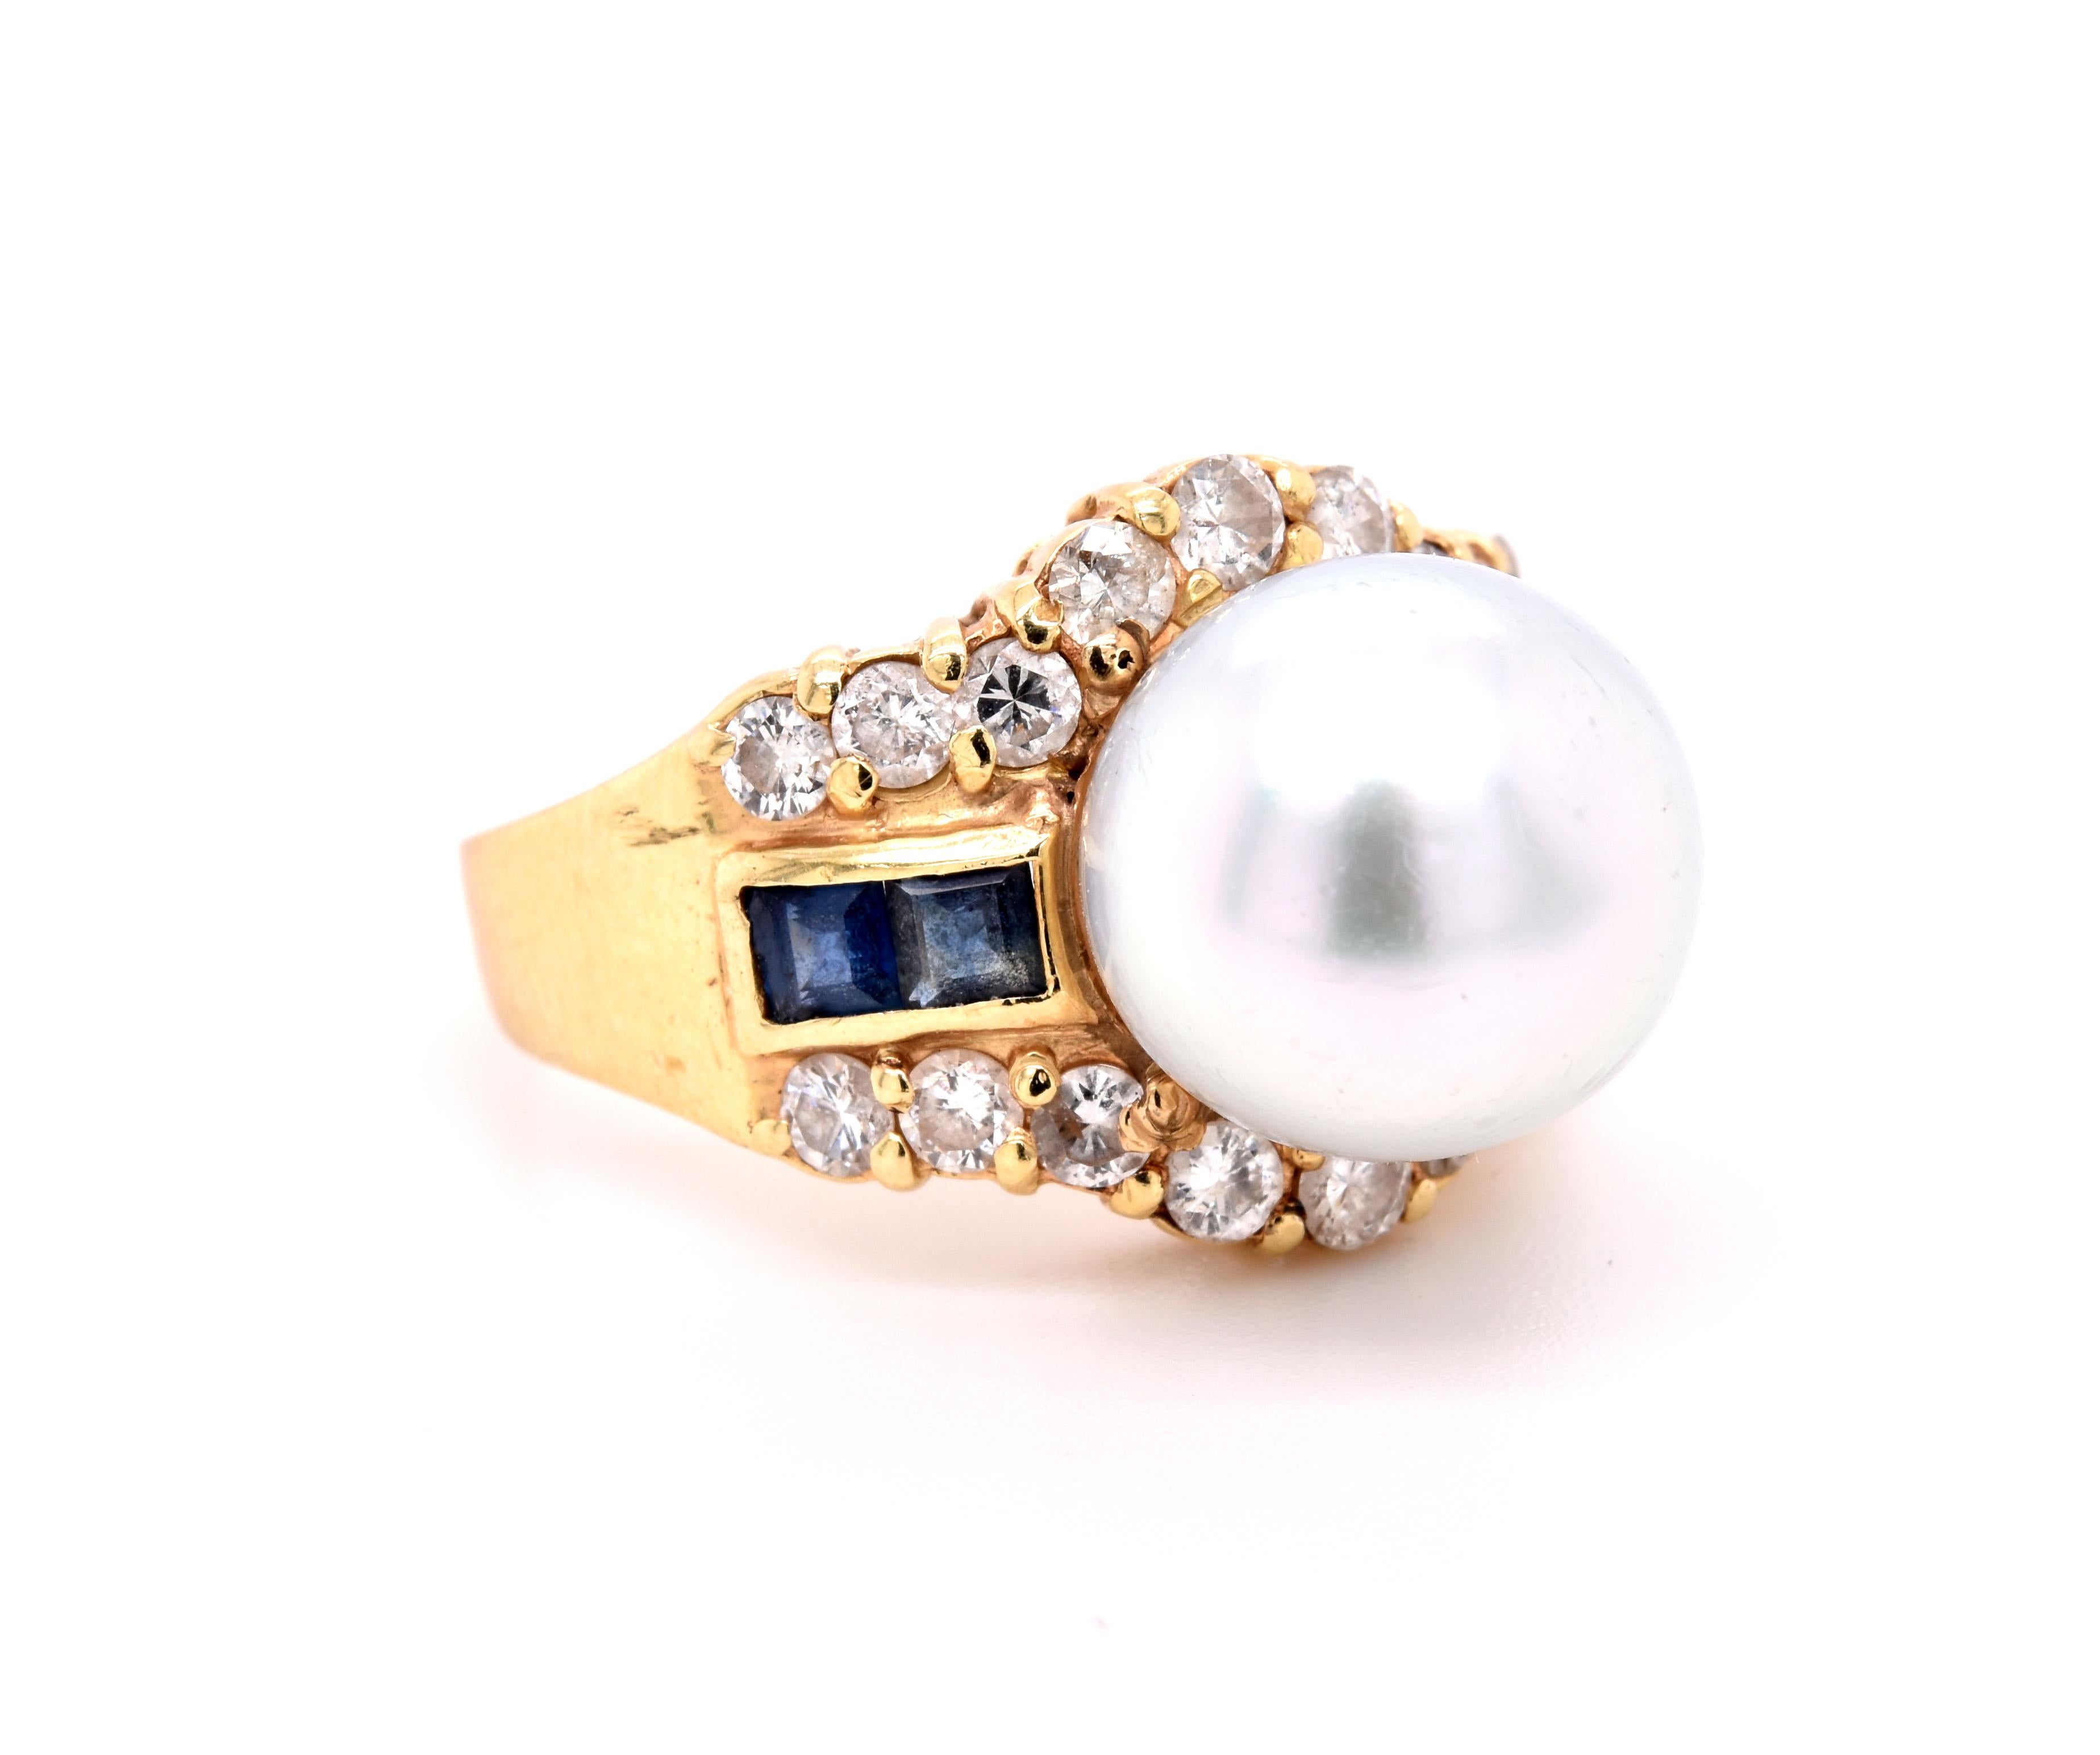 Material: 14K yellow gold 
Pearl: 10.5mm grey pearl
Diamonds: 18 round brilliant cut = .60cttw
Color: G
Clarity: SI
Sapphire: 4 princess cut = .50cttw
Ring Size: 5 (please allow two additional shipping days for sizing requests)
Dimensions: ring